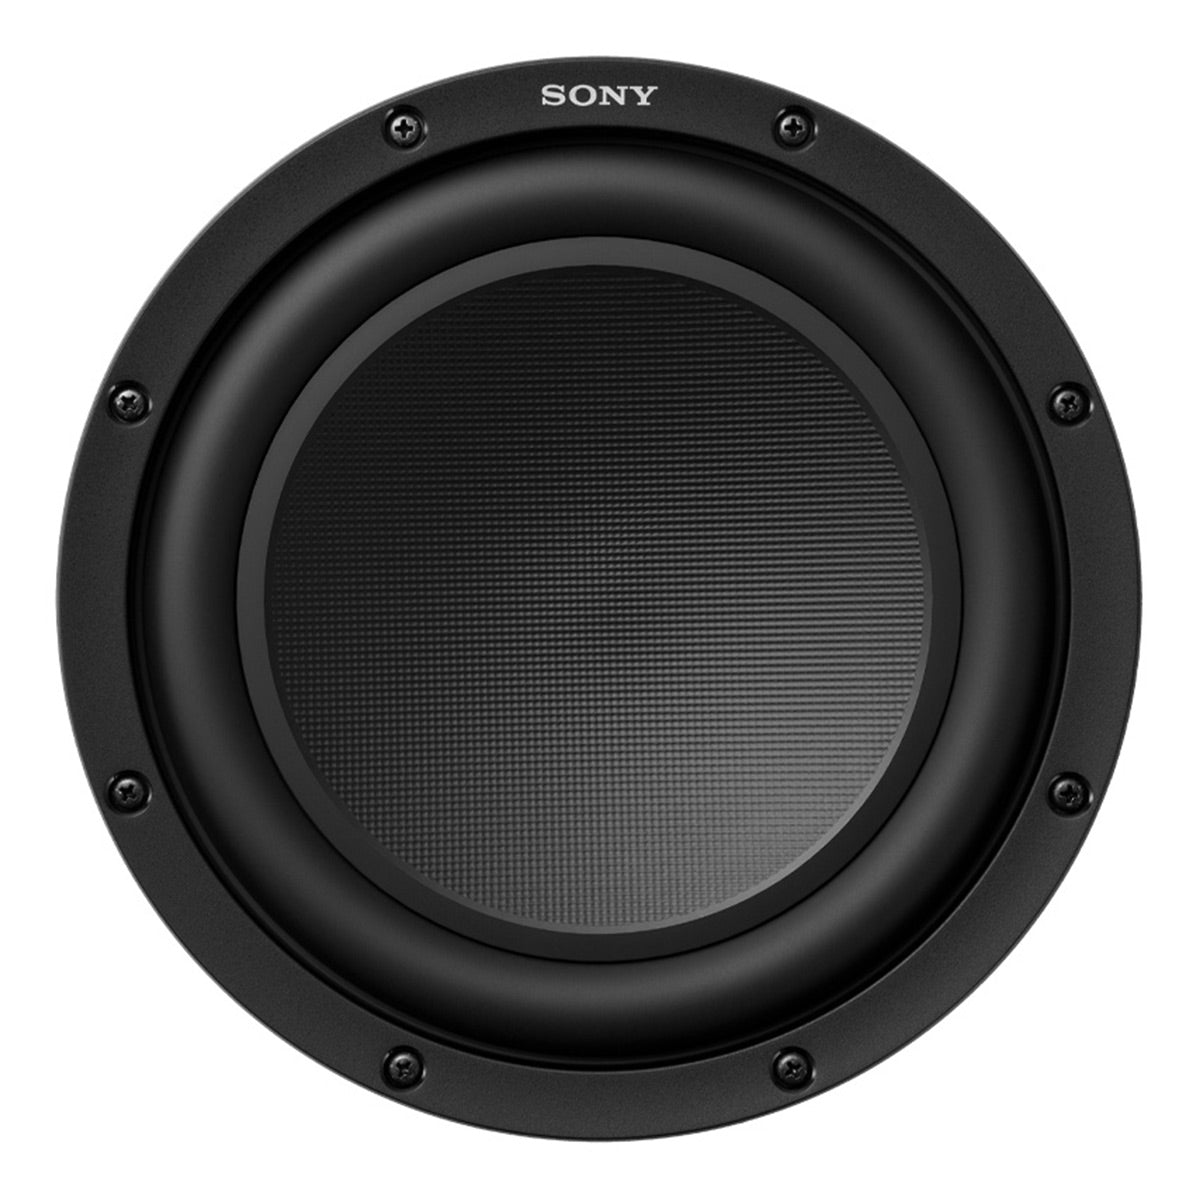 Photos - Car Speakers Sony Mobile XS-W104GS 10" Subwoofer Black XSW104GS 